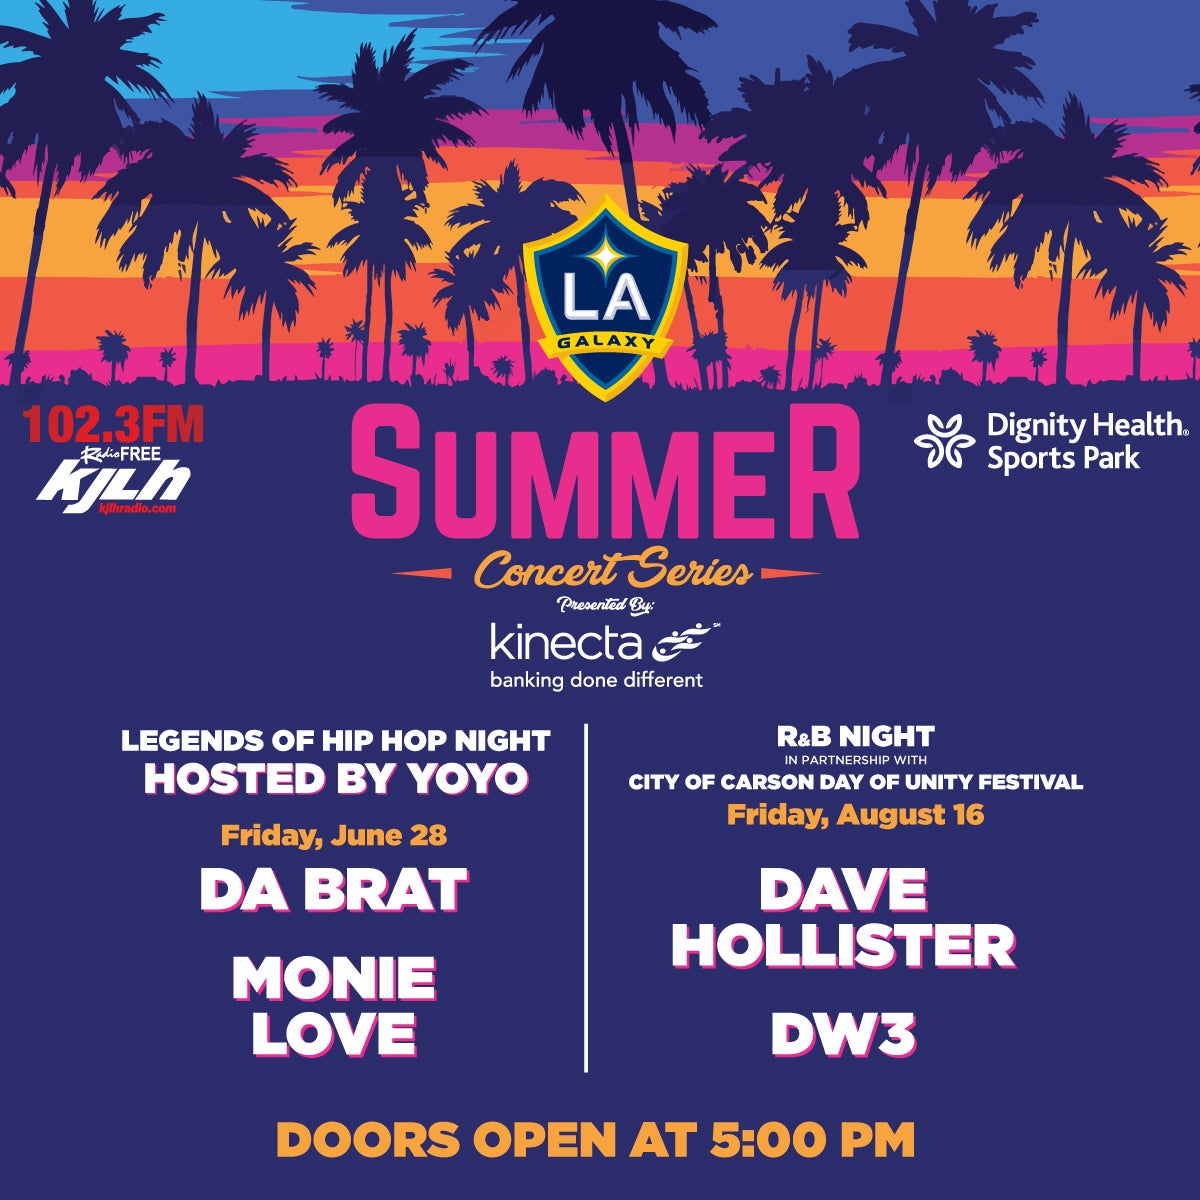 Summer Concert Series pres. by Kinecta Legends of Hip Hop Night